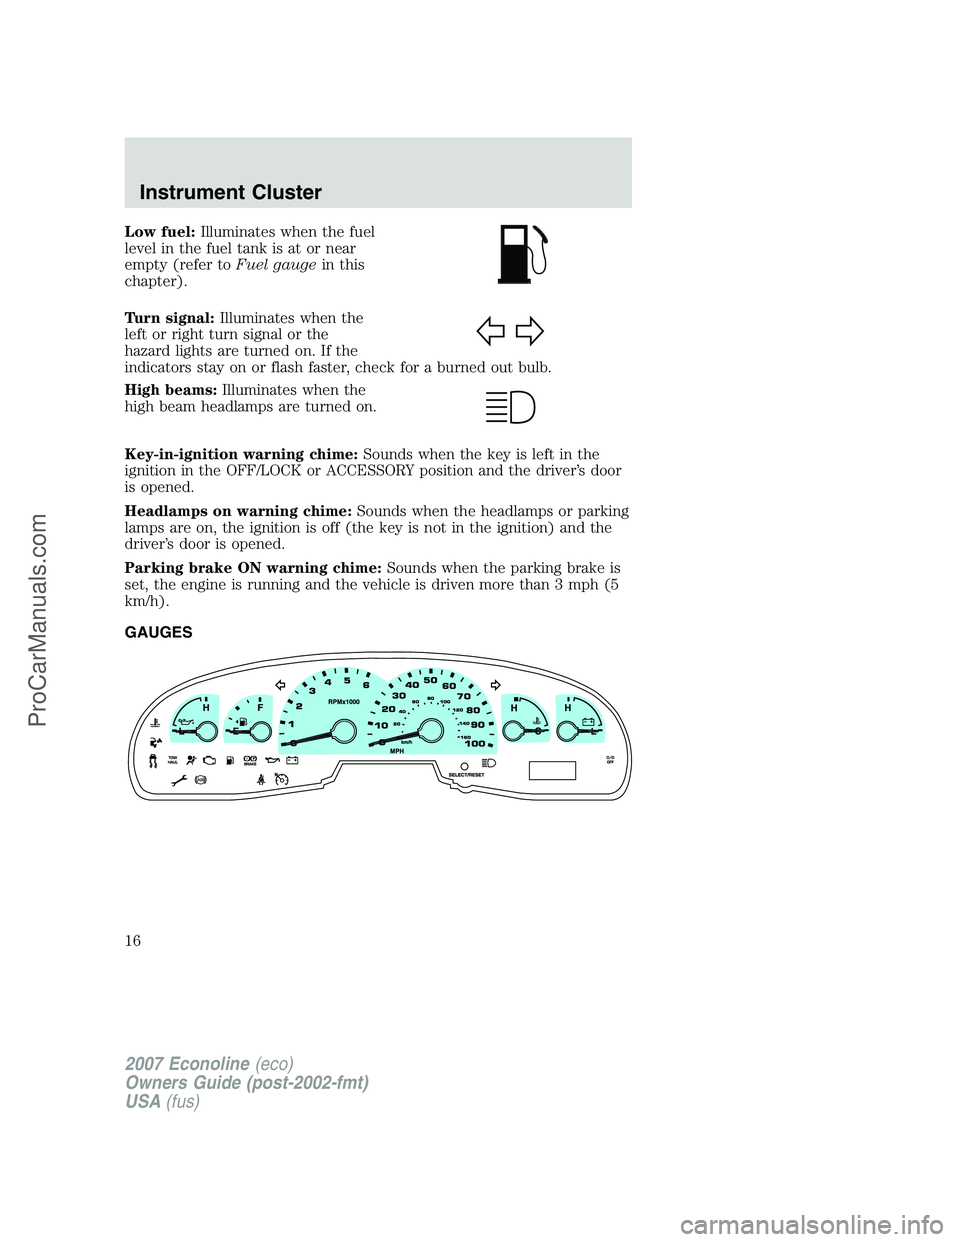 FORD ECONOLINE 2007  Owners Manual Low fuel:Illuminates when the fuel
level in the fuel tank is at or near
empty (refer toFuel gaugein this
chapter).
Turn signal:Illuminates when the
left or right turn signal or the
hazard lights are t